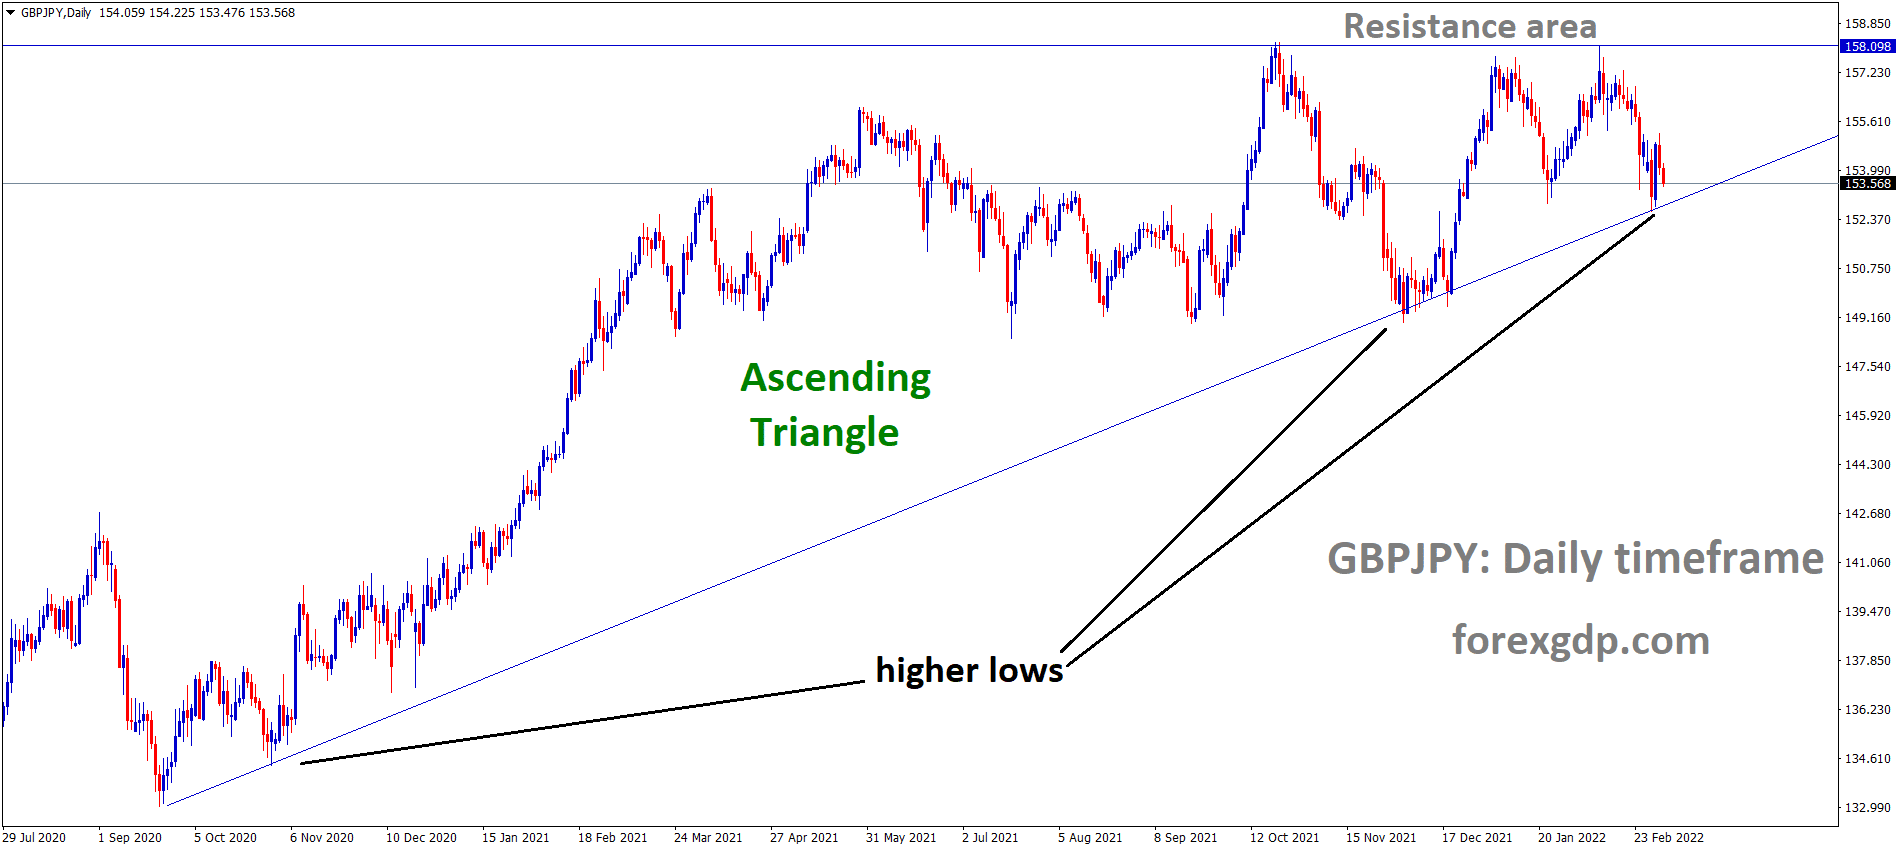 GBPJPY is moving in an ascending triangle pattern and the market has reached the higher low area of the pattern.